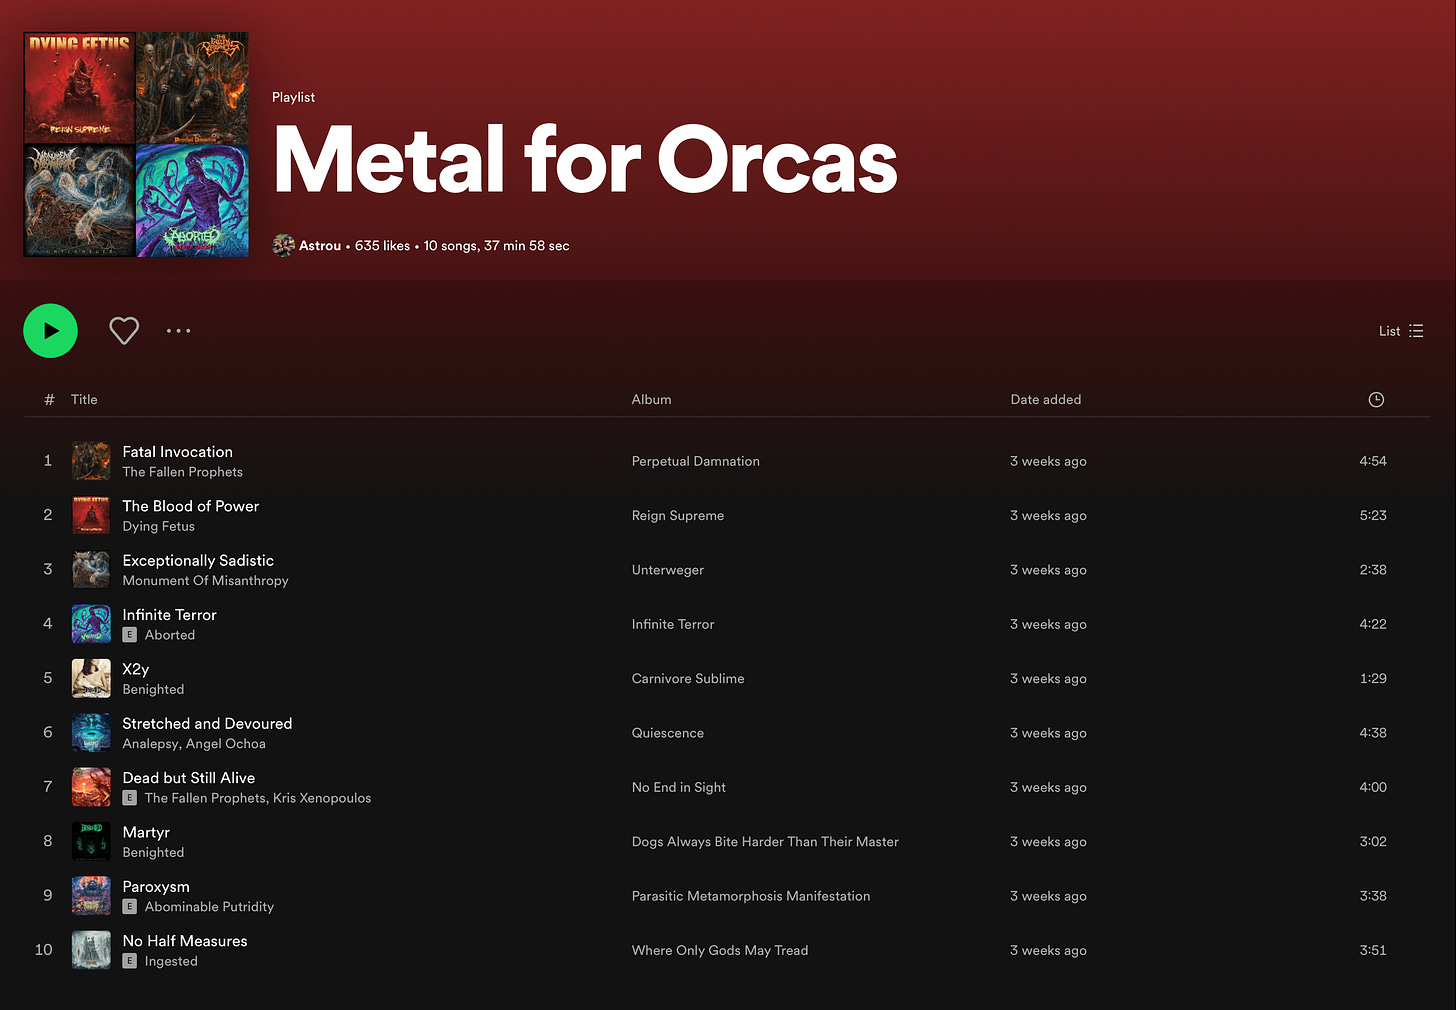 Screen shot of the "Metal for Orcas" playlist on Spotify